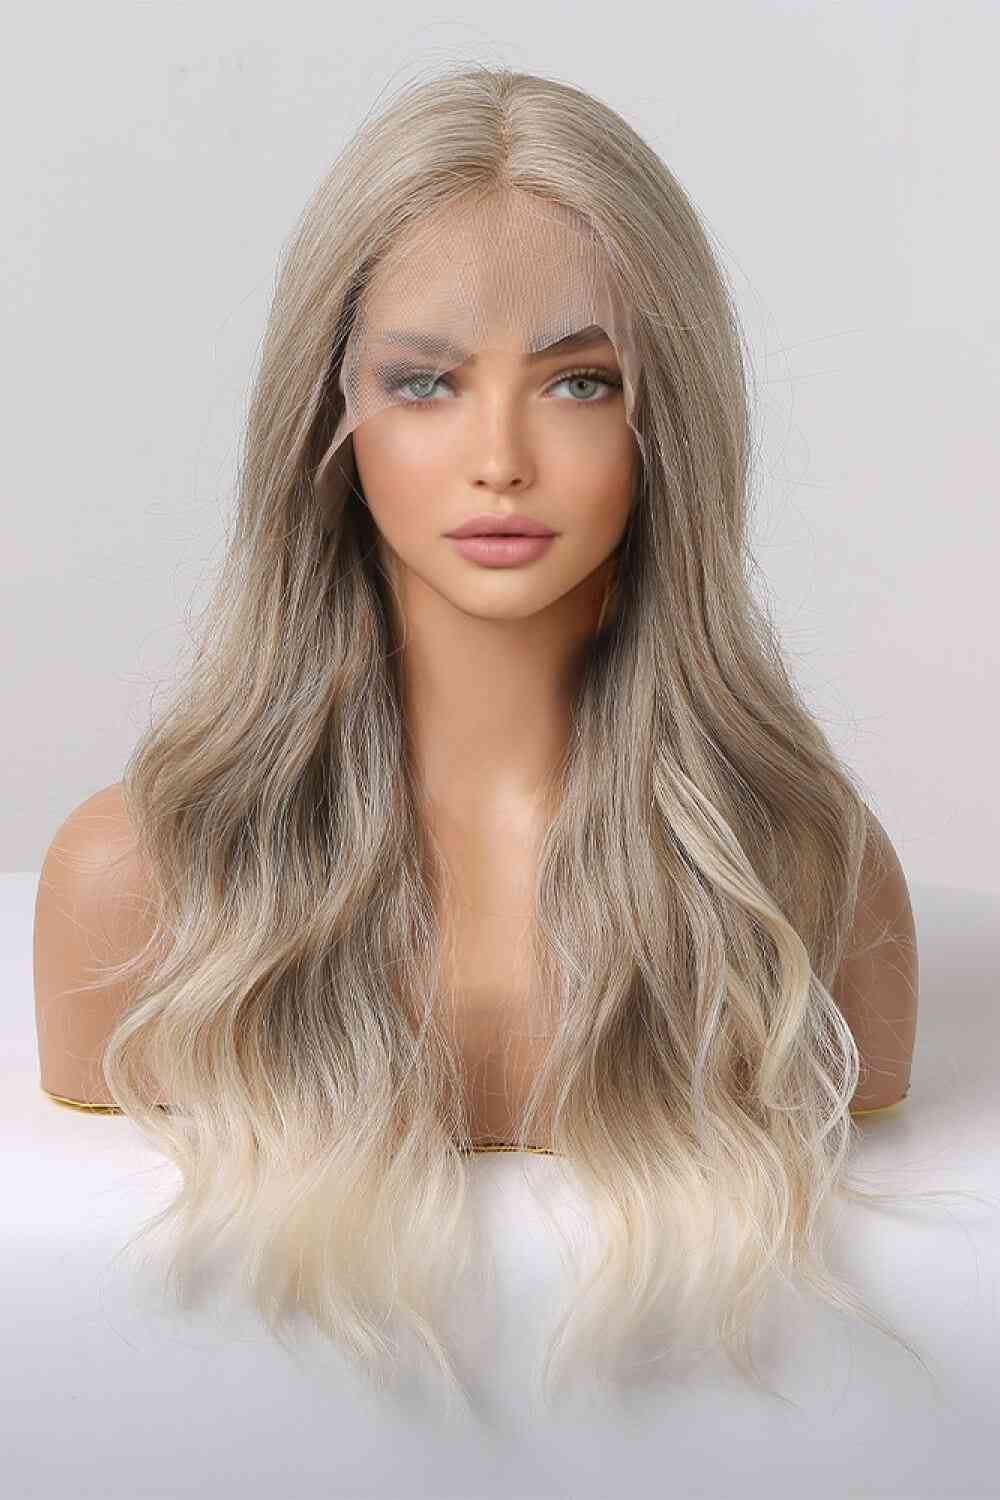 13*2" Lace Front Wigs Synthetic Long Wave 24" 150% Density in Medium Blonde Highlights Medium Blonde Highlights One Size 